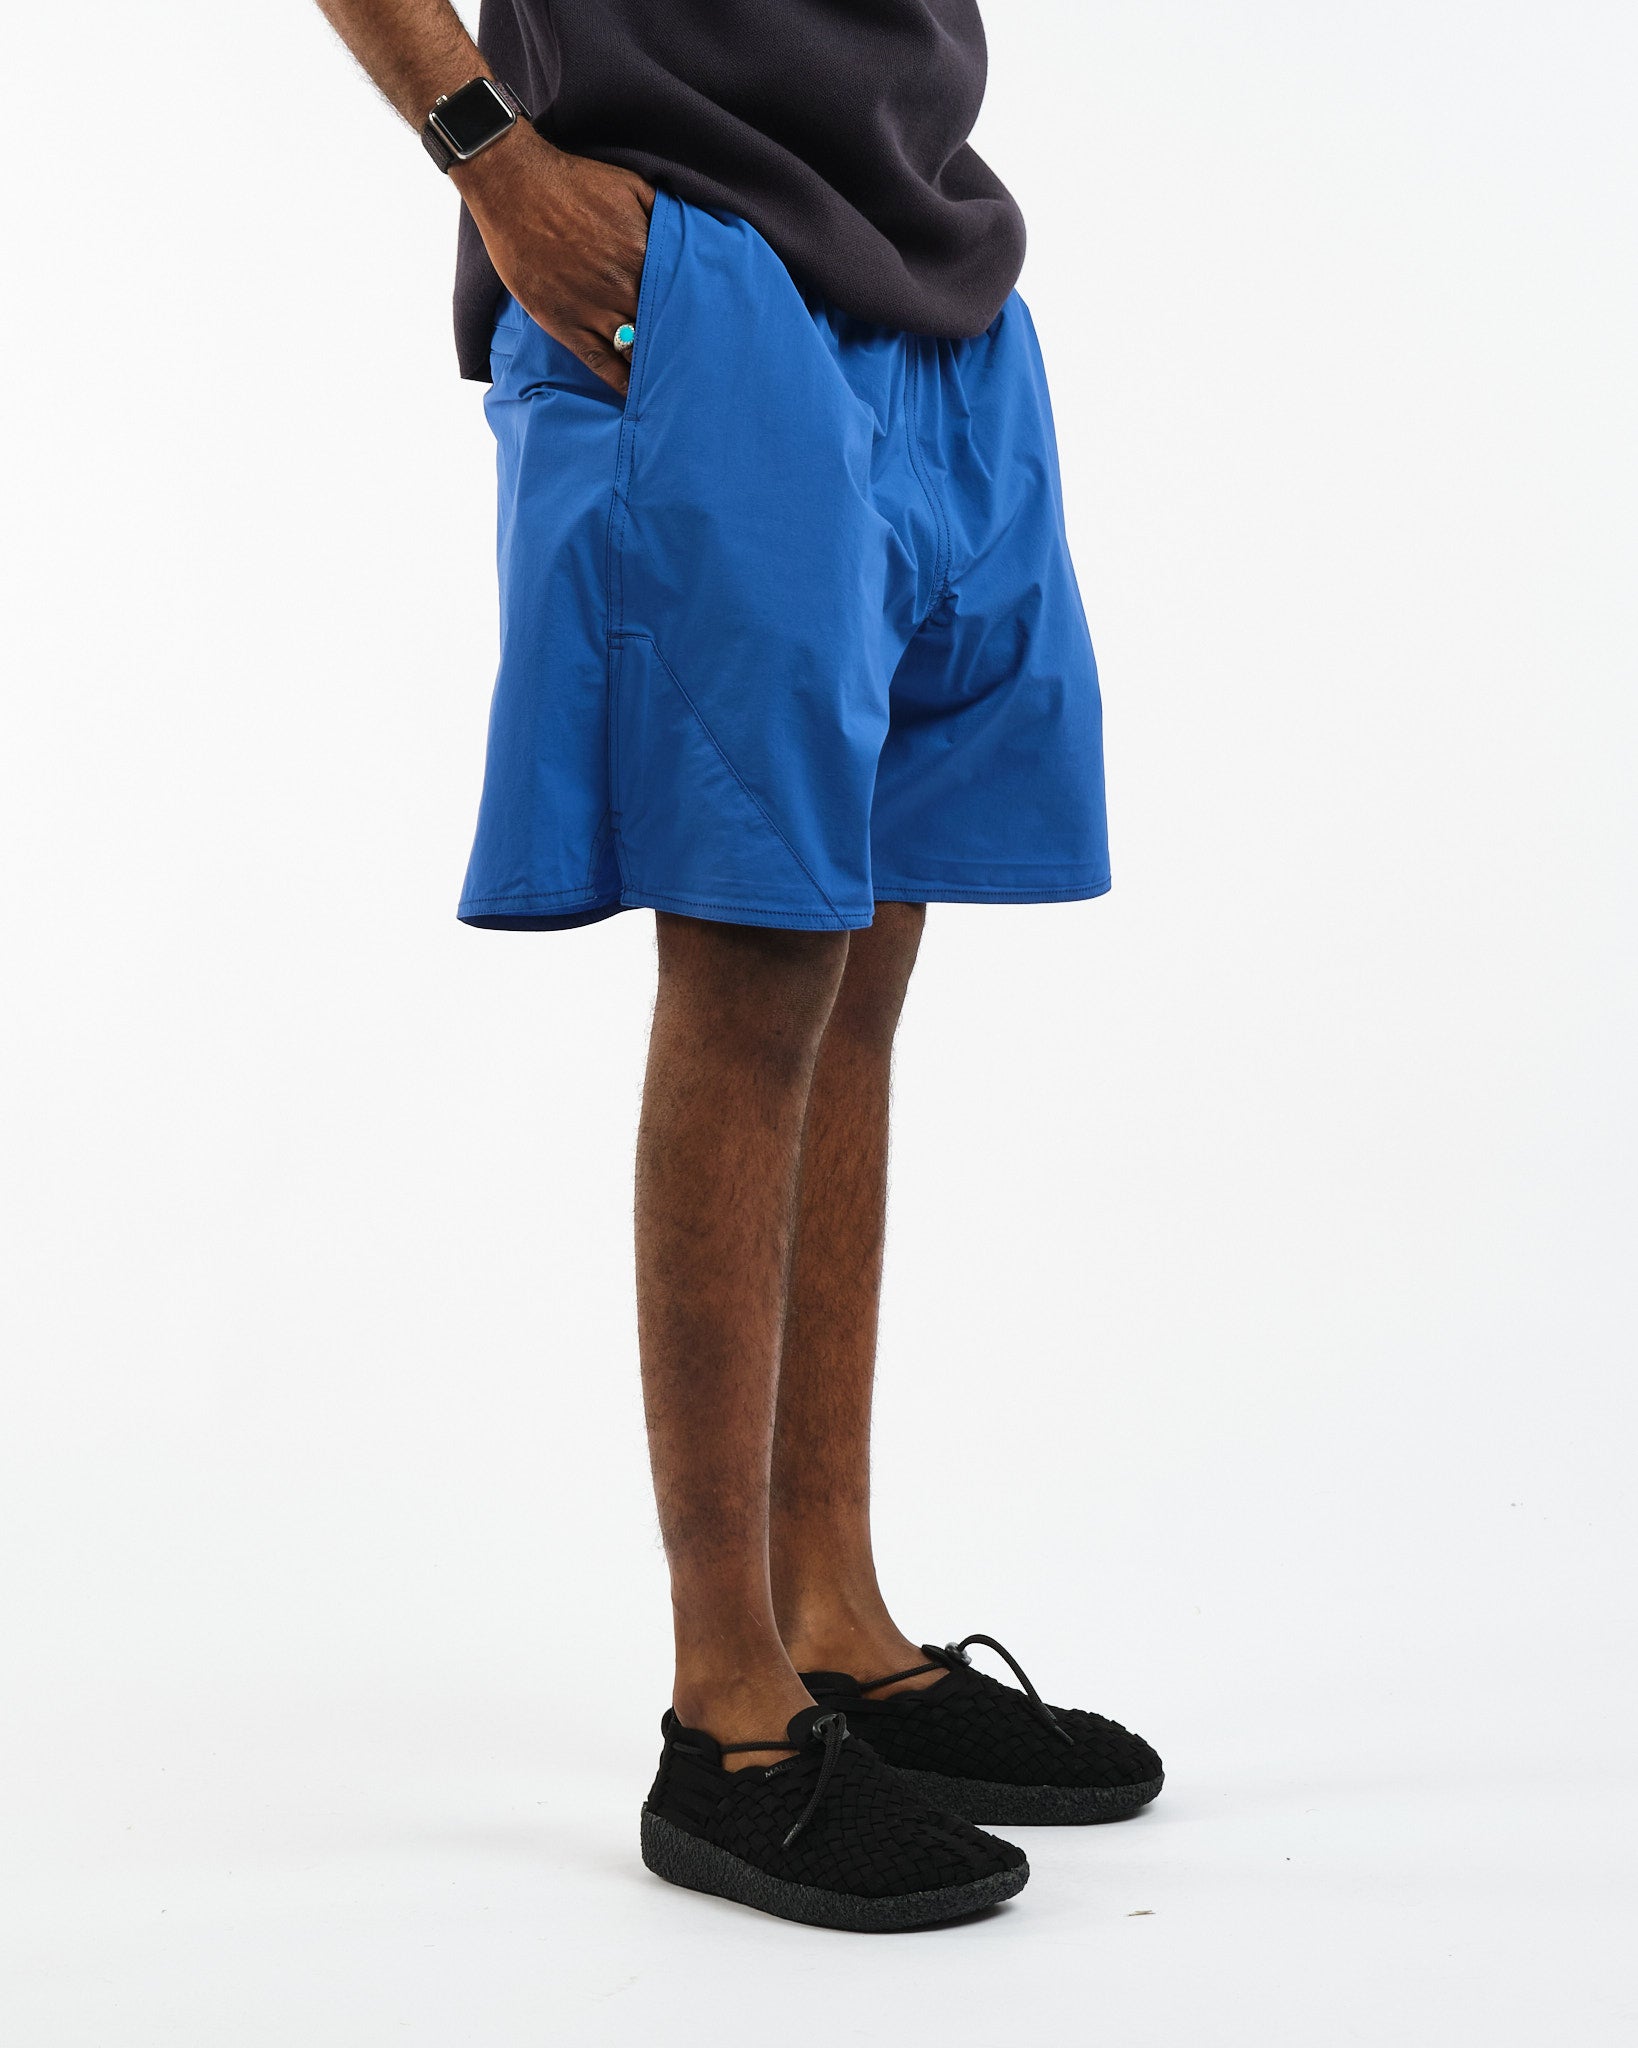 MIL Athletic Shorts Mini Ripstop Blue - Meadow